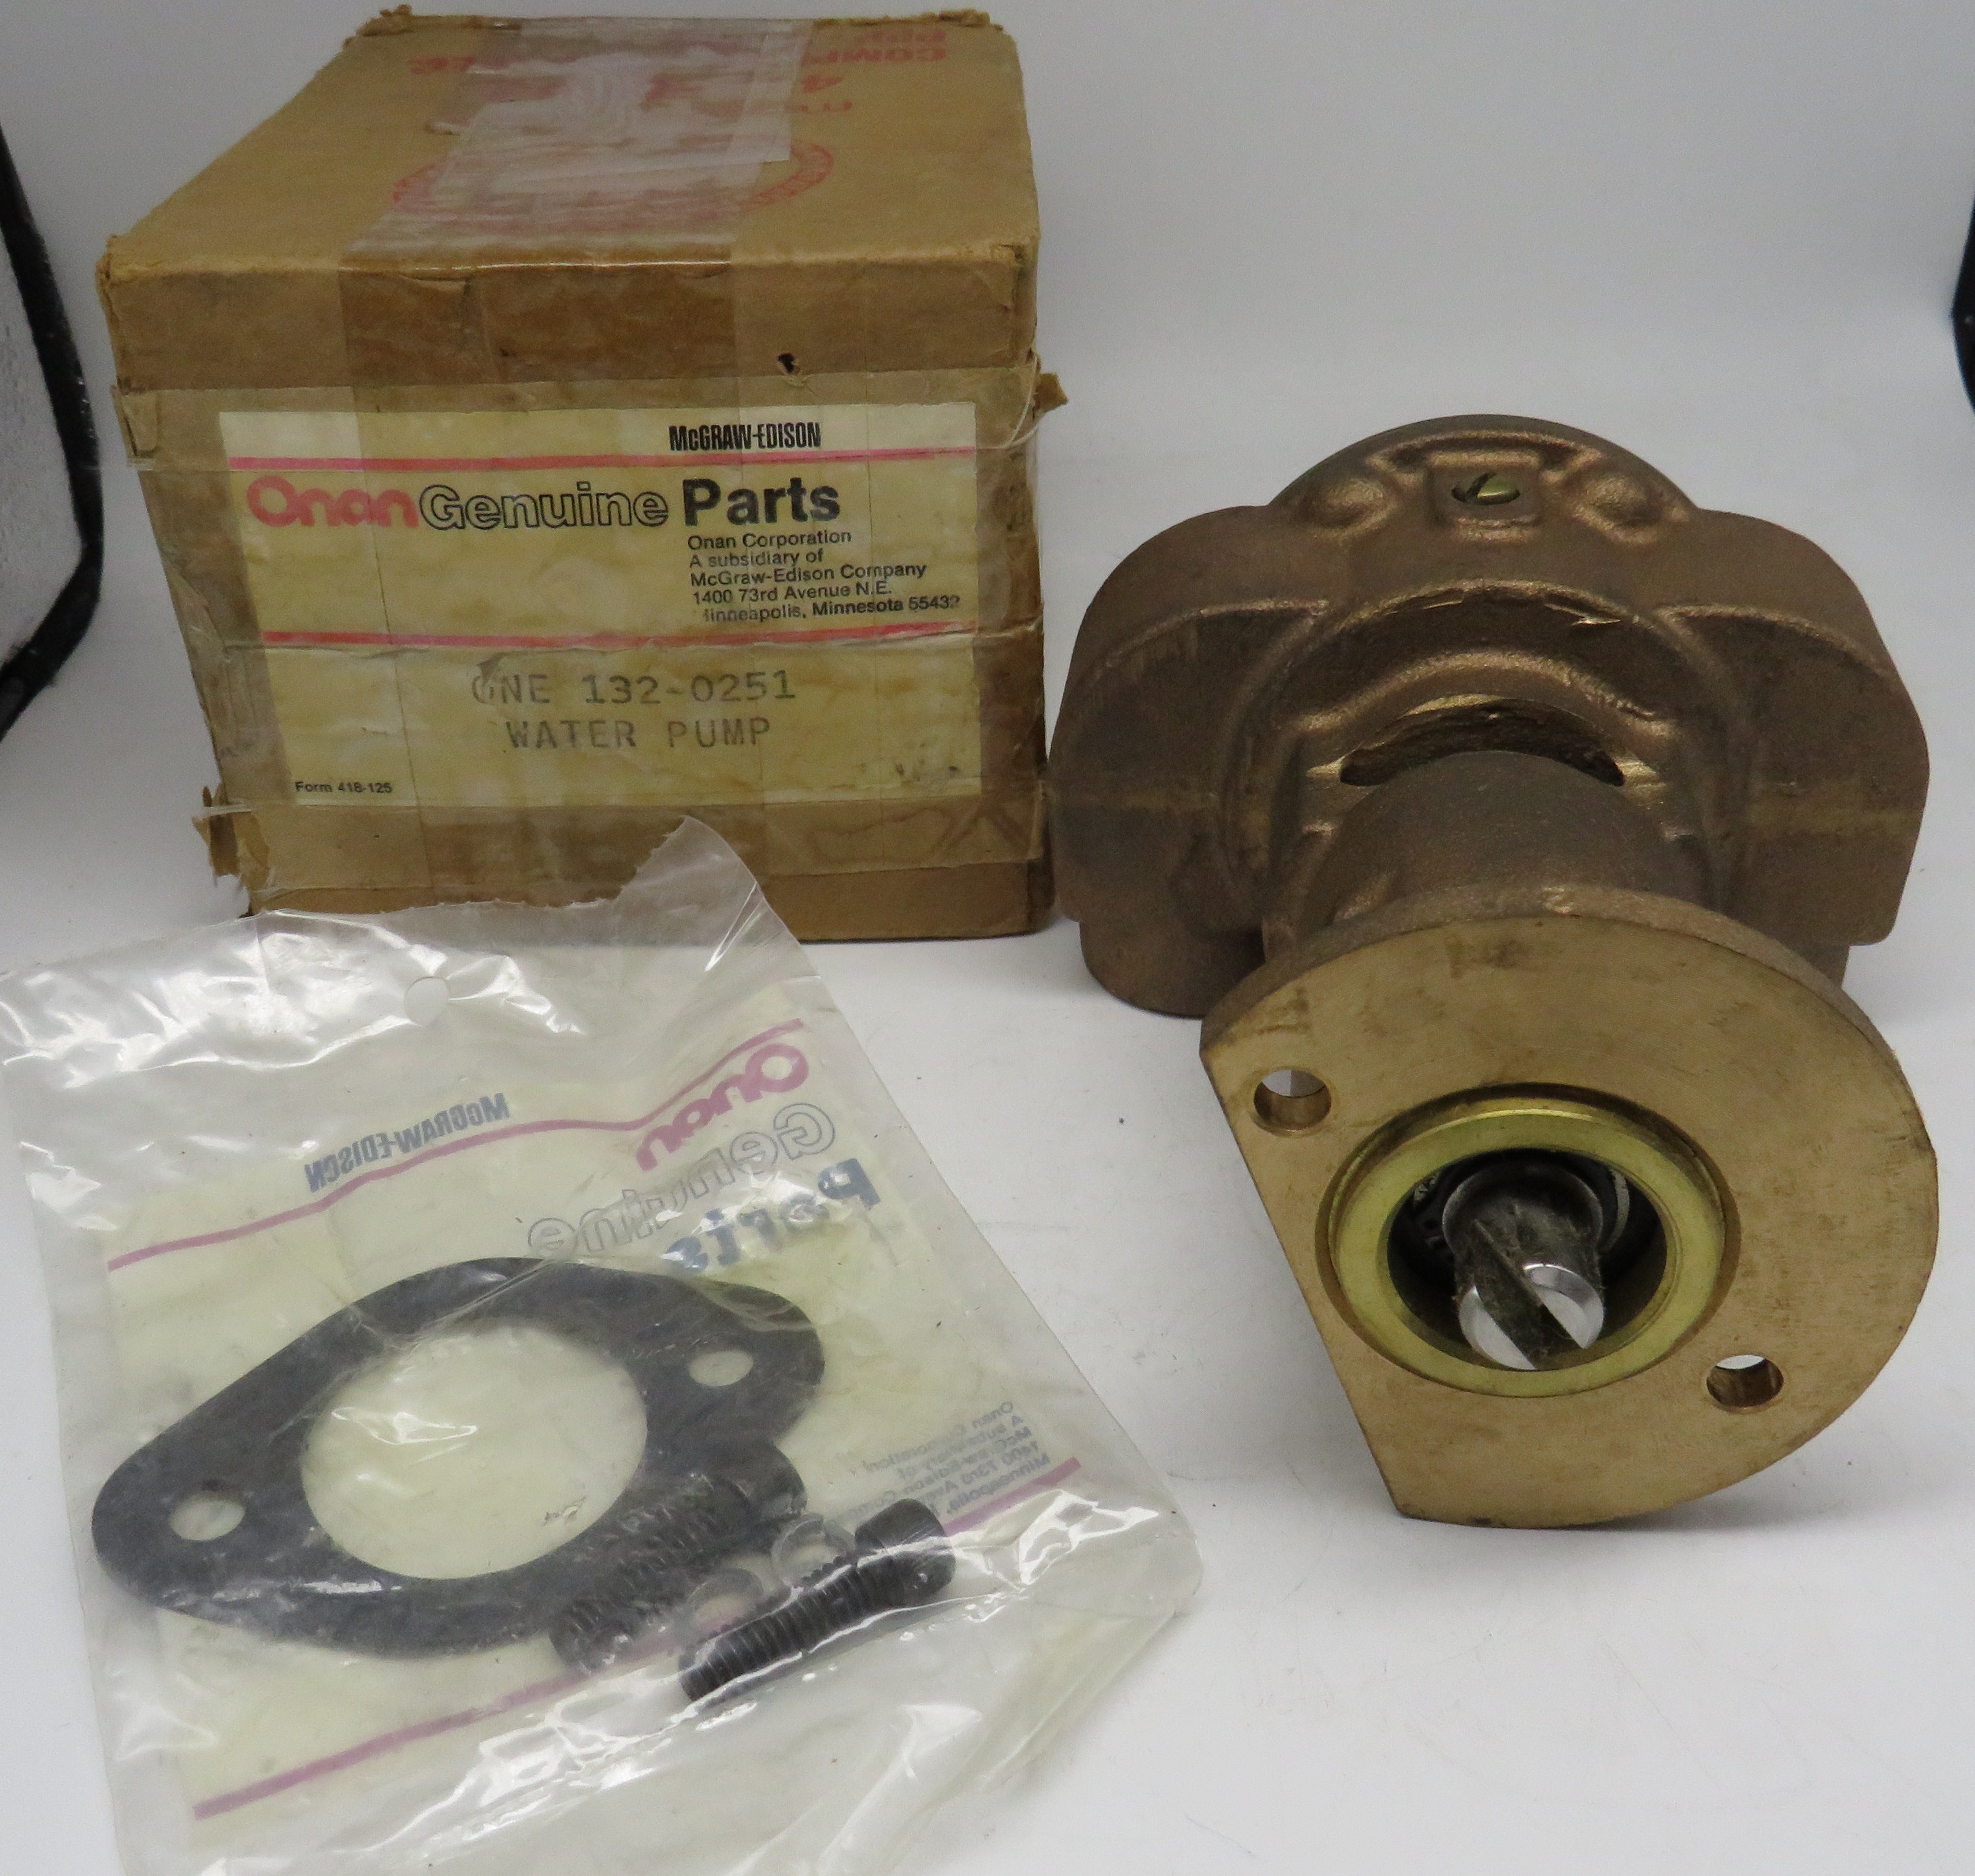 132-0251 or 132-0147 Onan Water Pump for MDJC & MDJF Replaces Water Pump 132-0115 Jabsco 18400-0050132-0251 OBSOLETE  3/5/2024 THIS PART IS IN STOCK 3/5/2024